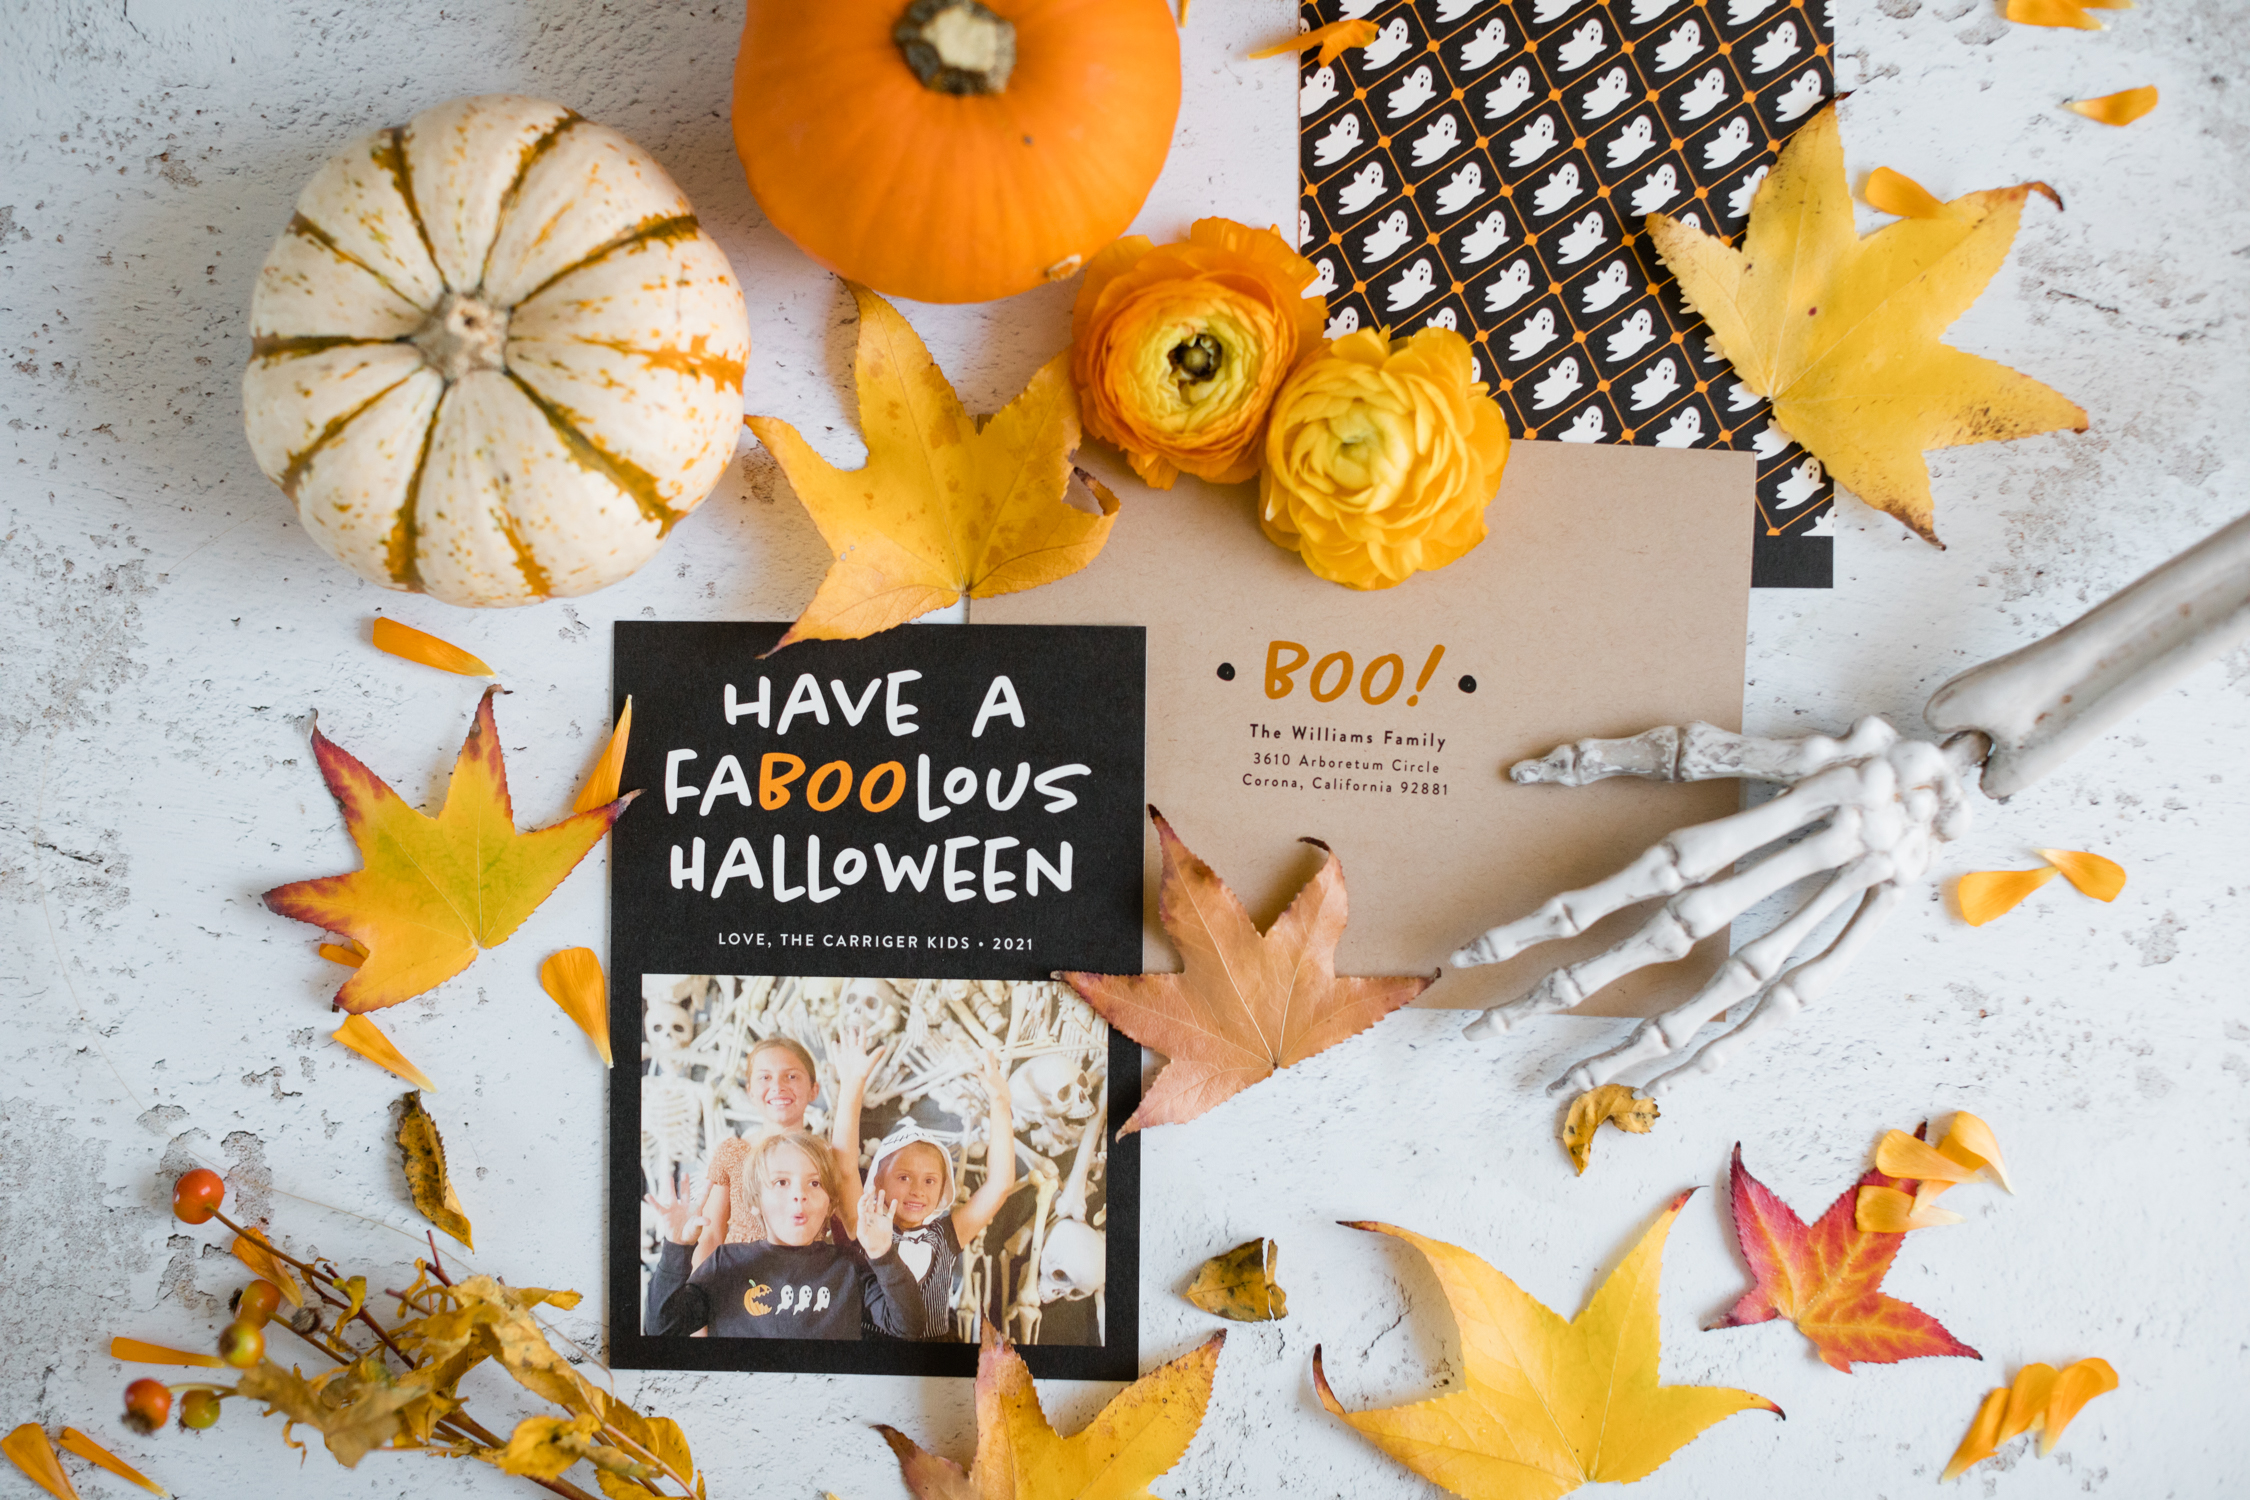 Spook Friends & Family with Halloween Cheer & Cuteness from Minted